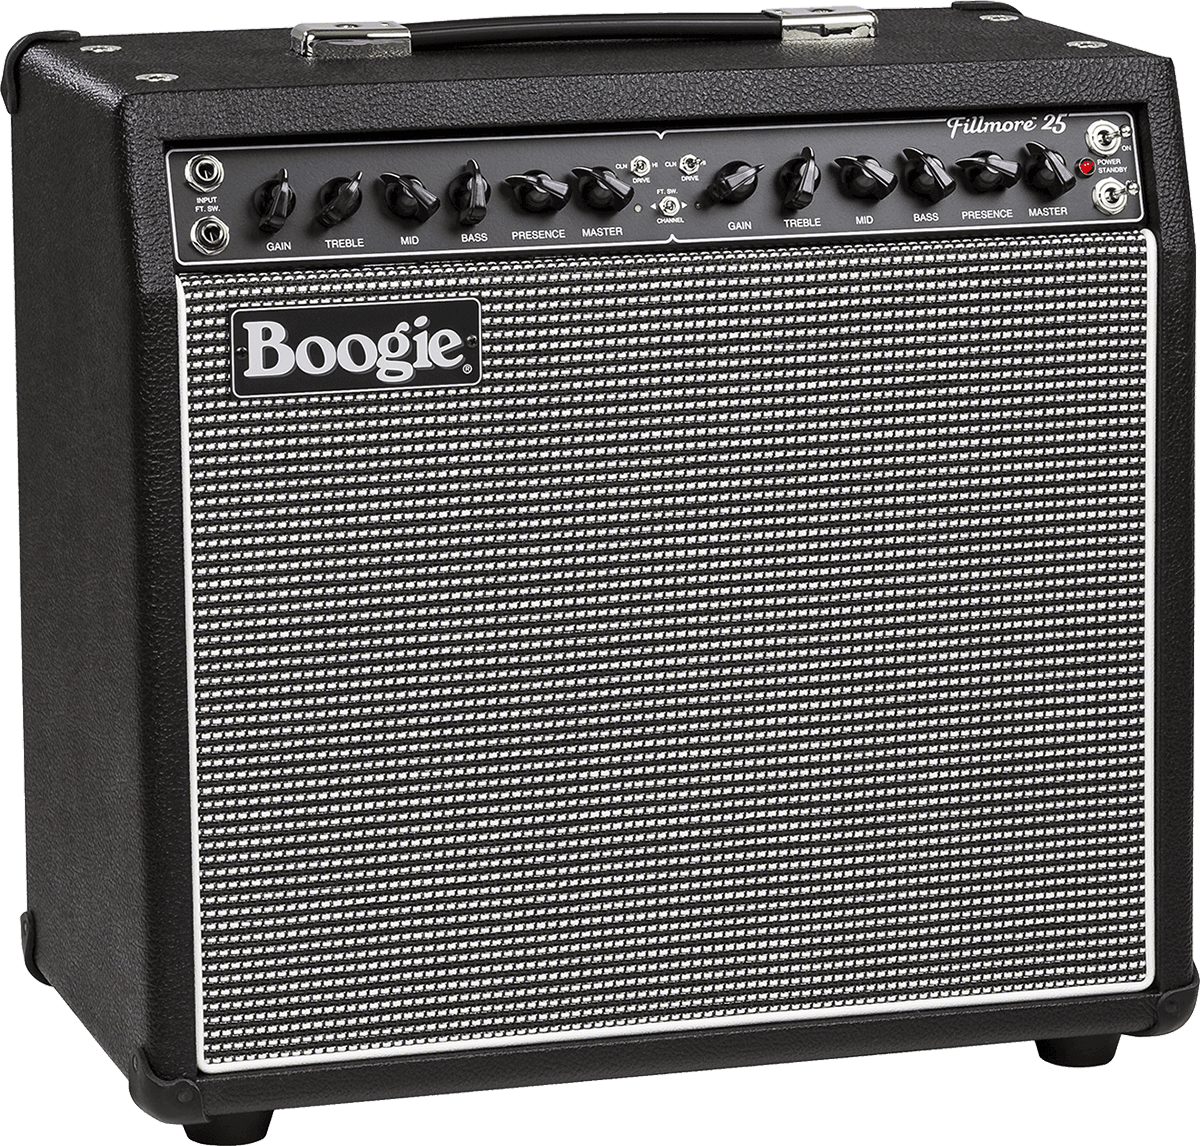 Mesa Boogie Fillmore 25 1x12 18/23w - Electric guitar combo amp - Variation 1